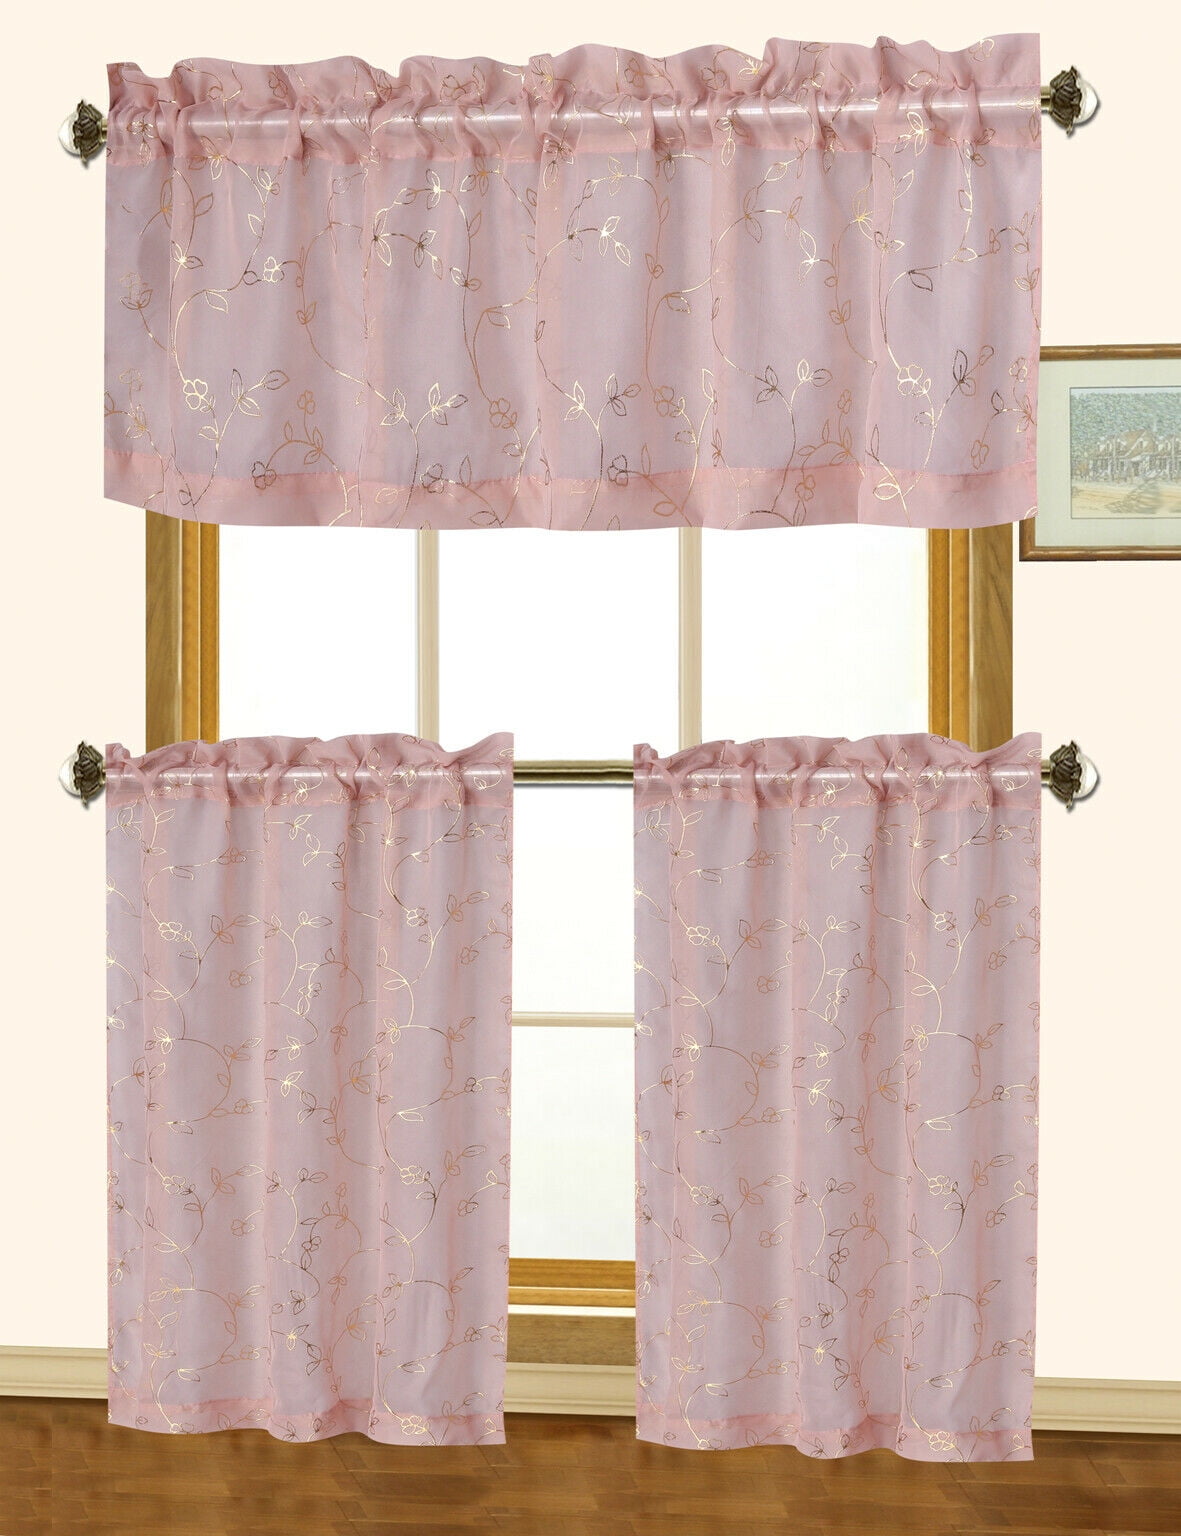 BRIGHT LEAVES 54"x15" & Valance Printed Curtains Set: 2 Tiers 27"x36" 3 pc